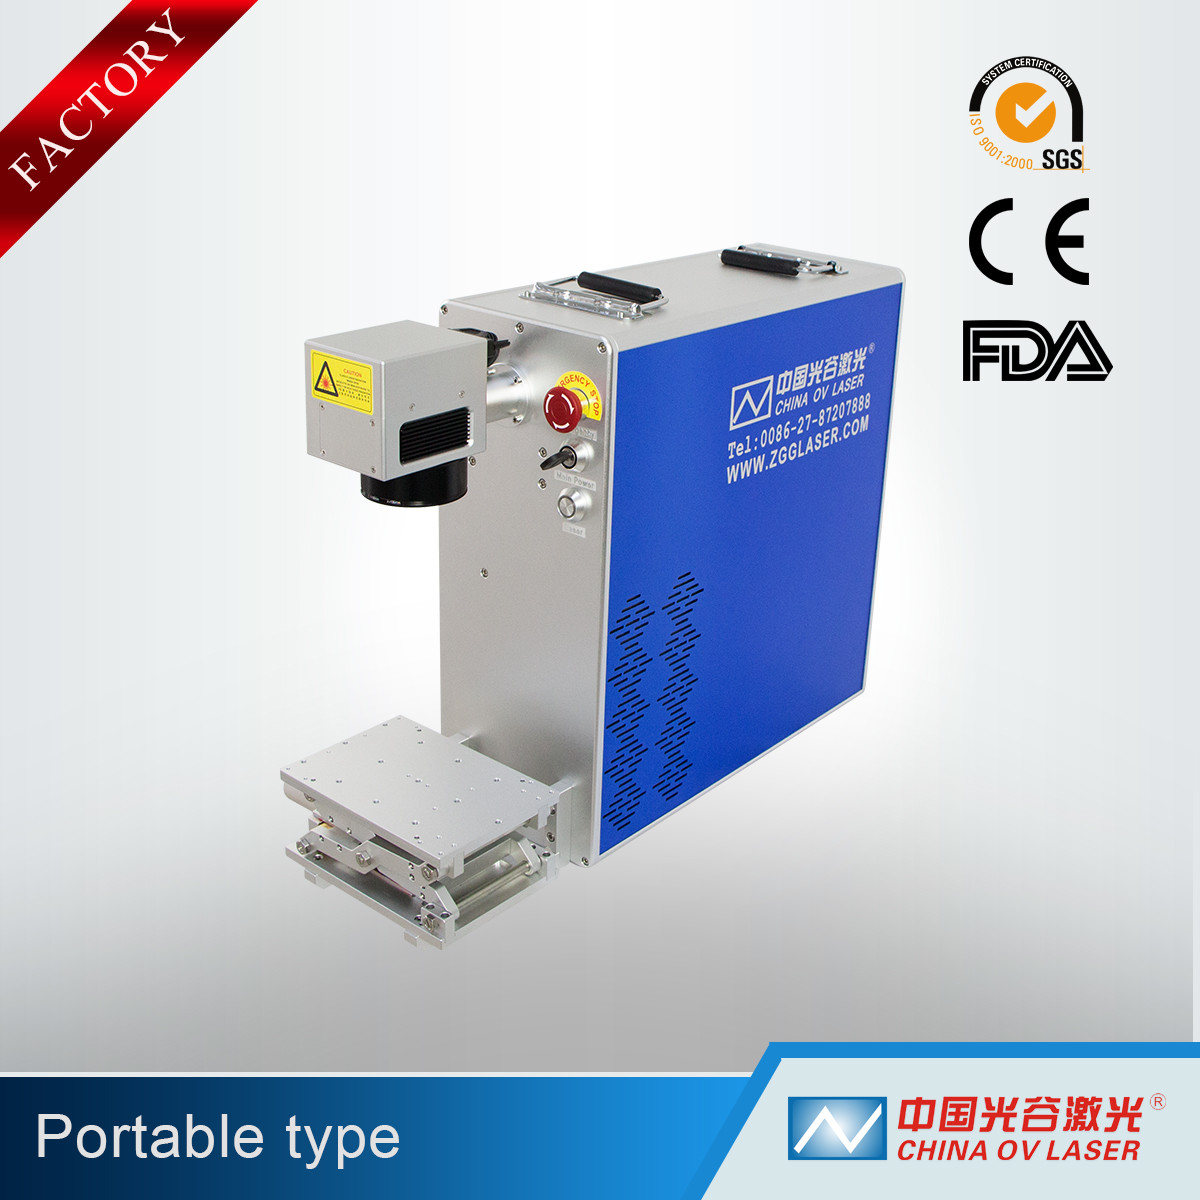 Wholesale Mini Portable 20W Fiber Laser Marking Machine for Metal with CE from china suppliers